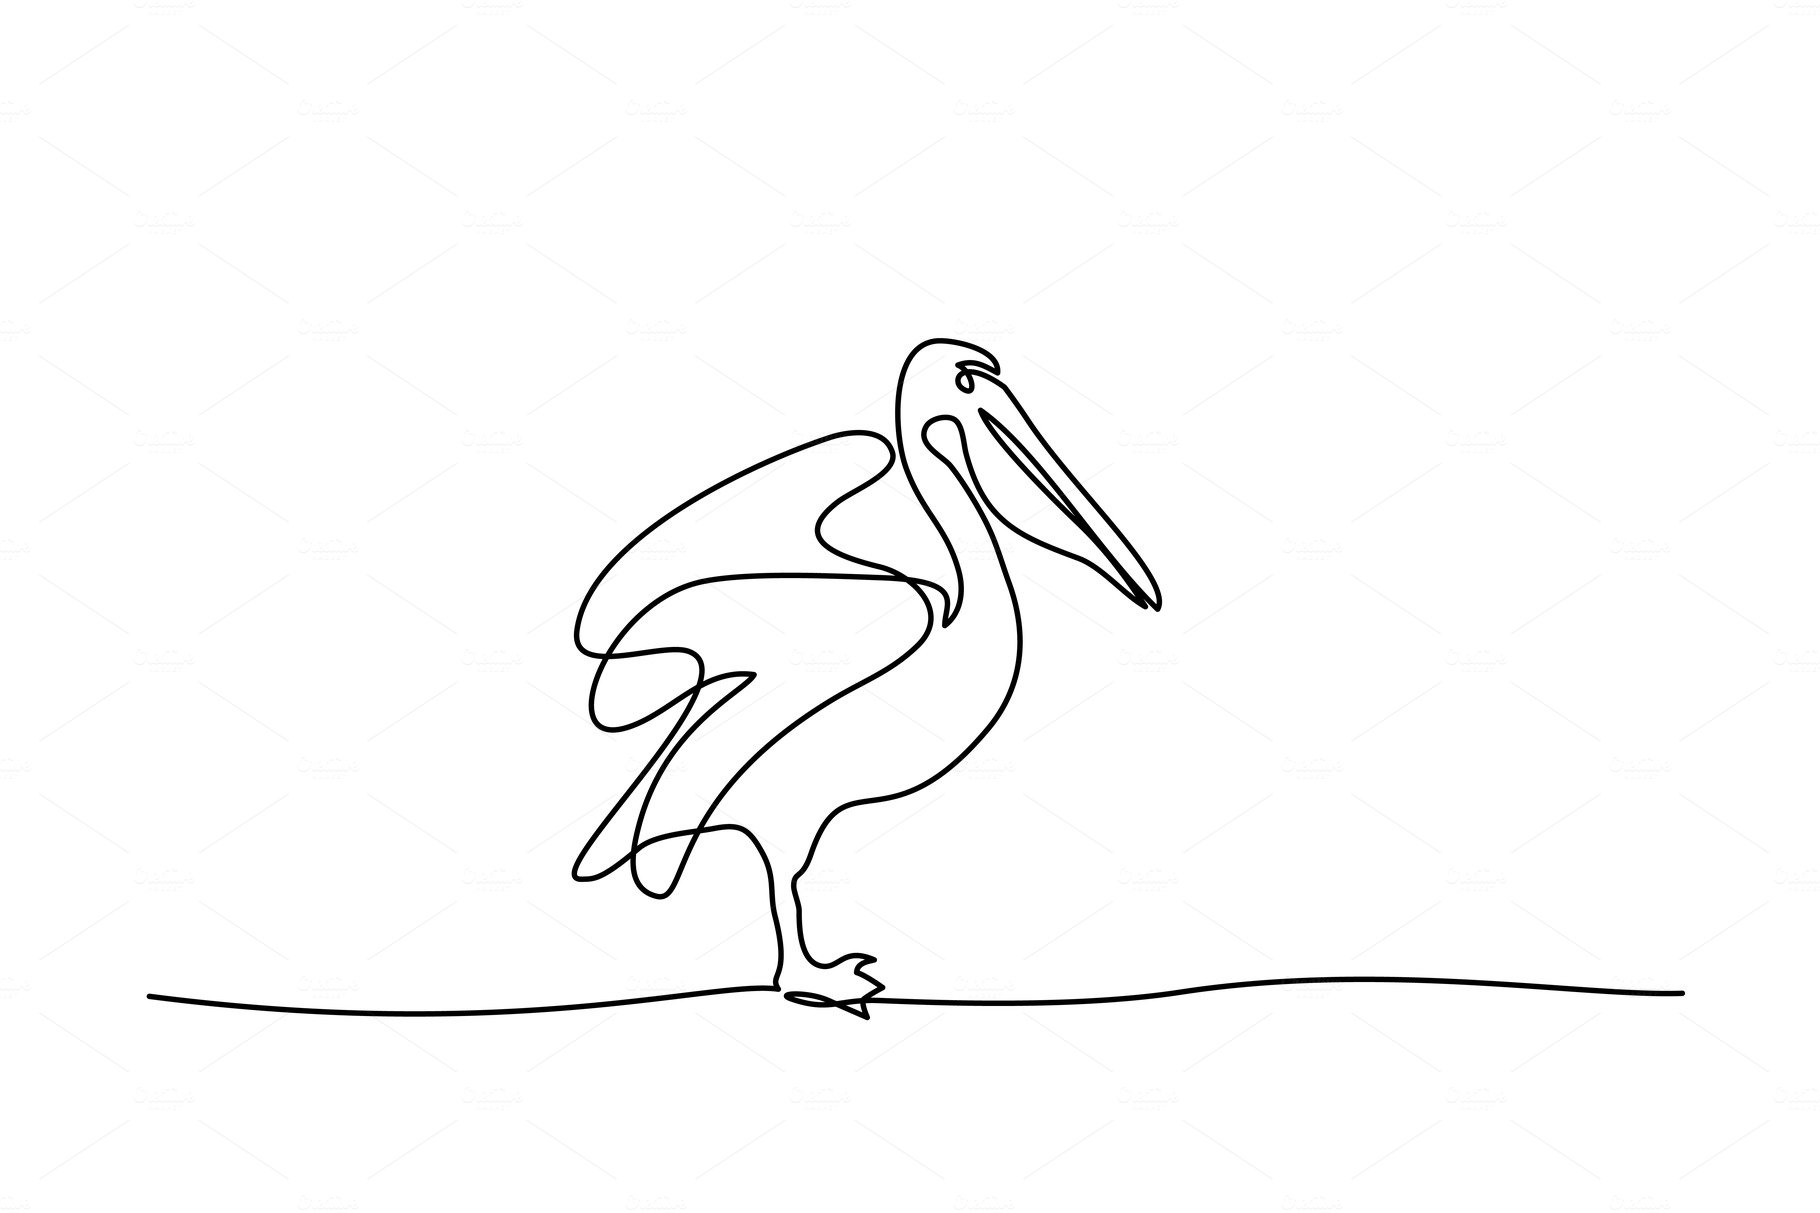 Pelican symbol one line drawing cover image.